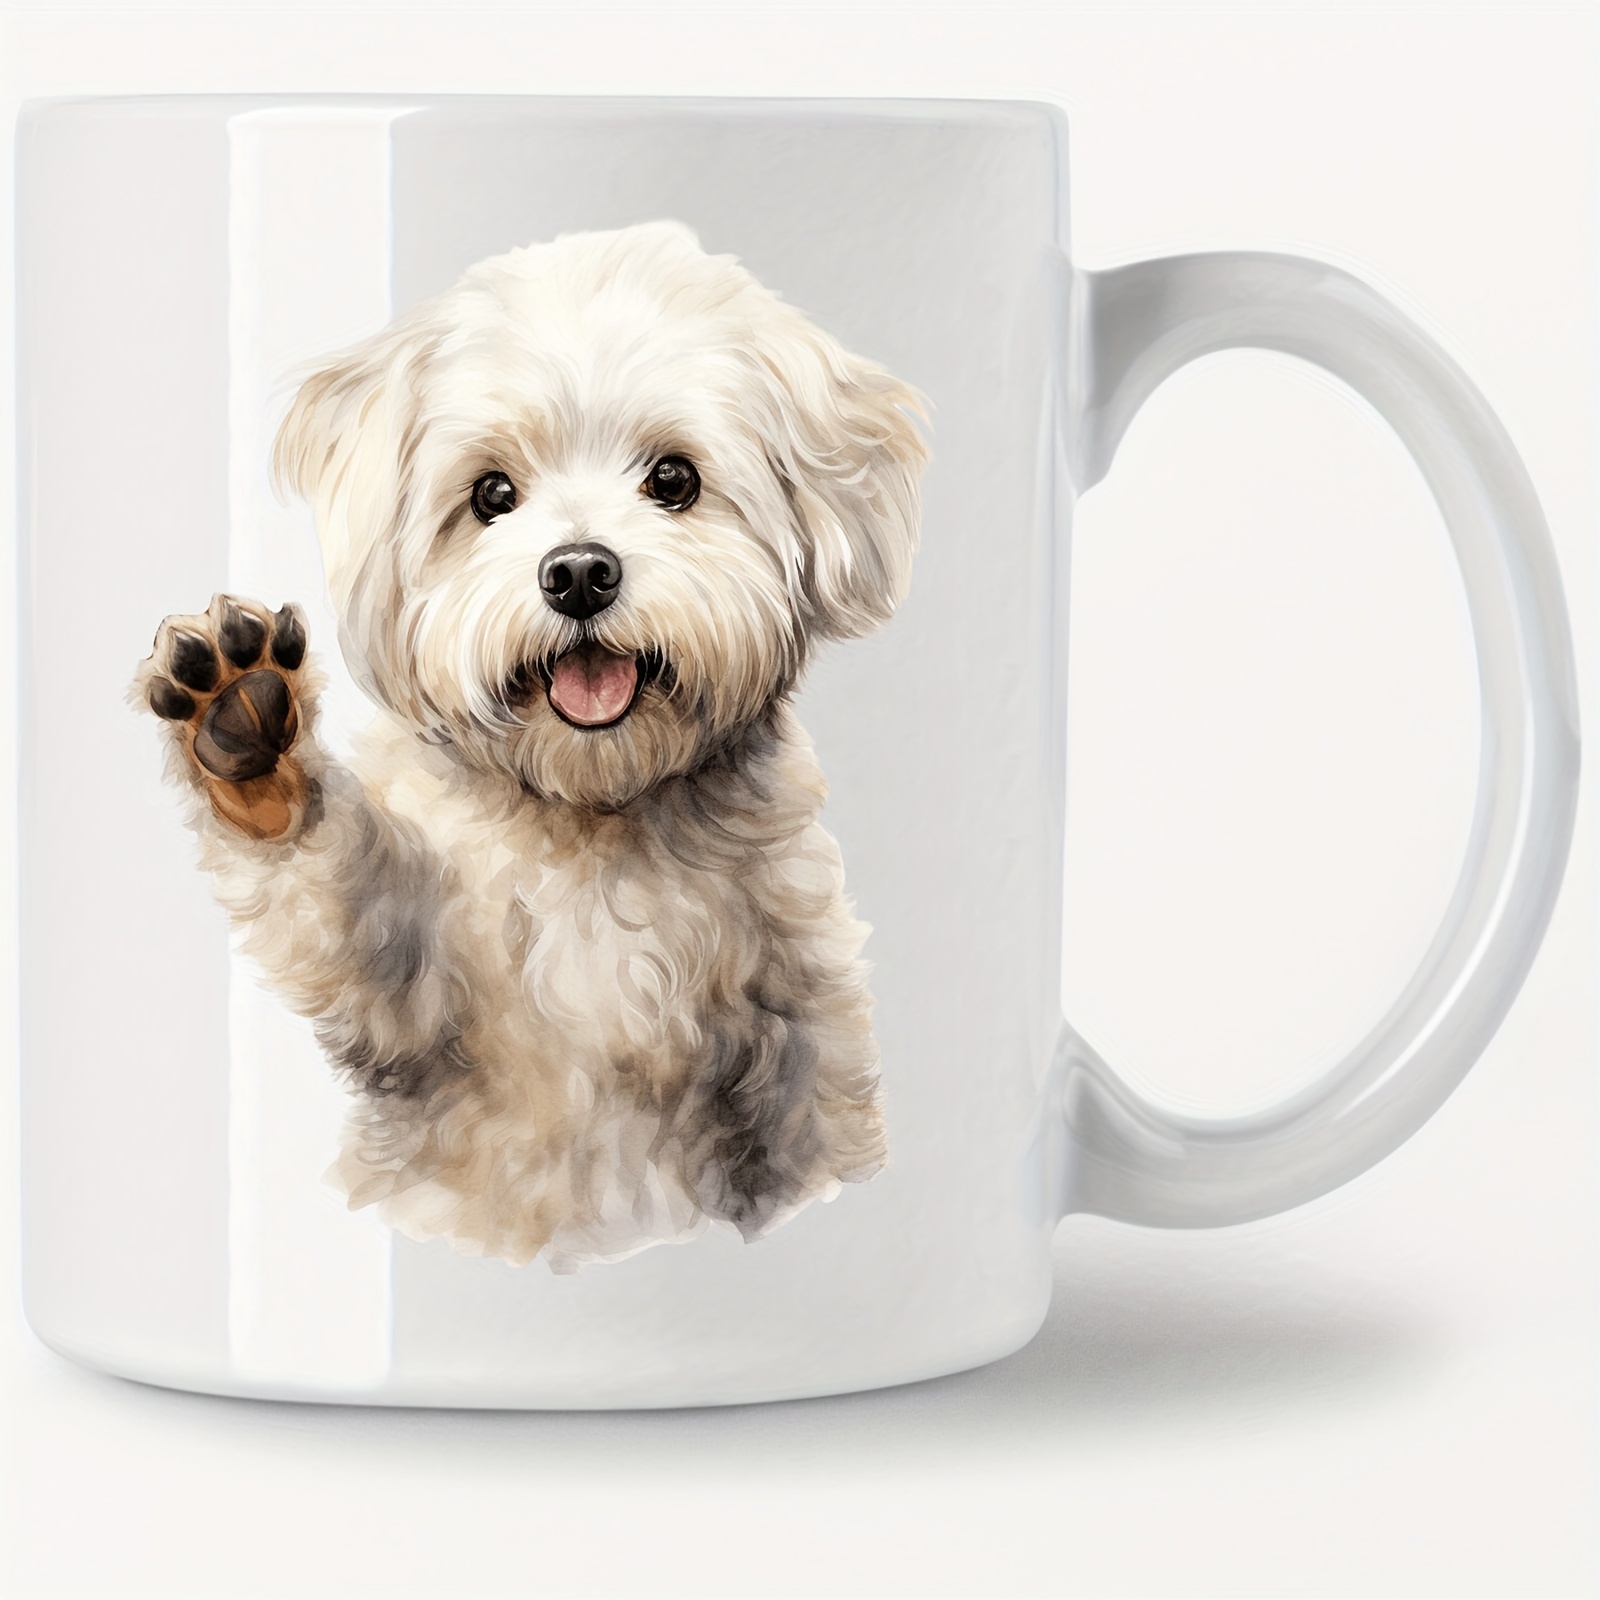 

1pc, Funny Coffee Mug, 11oz/330ml Ceramic Coffee Cups, Bichon_5office Portable Ceramic Mug For Hot Or Cold Drink, Novelty Gift, For Office